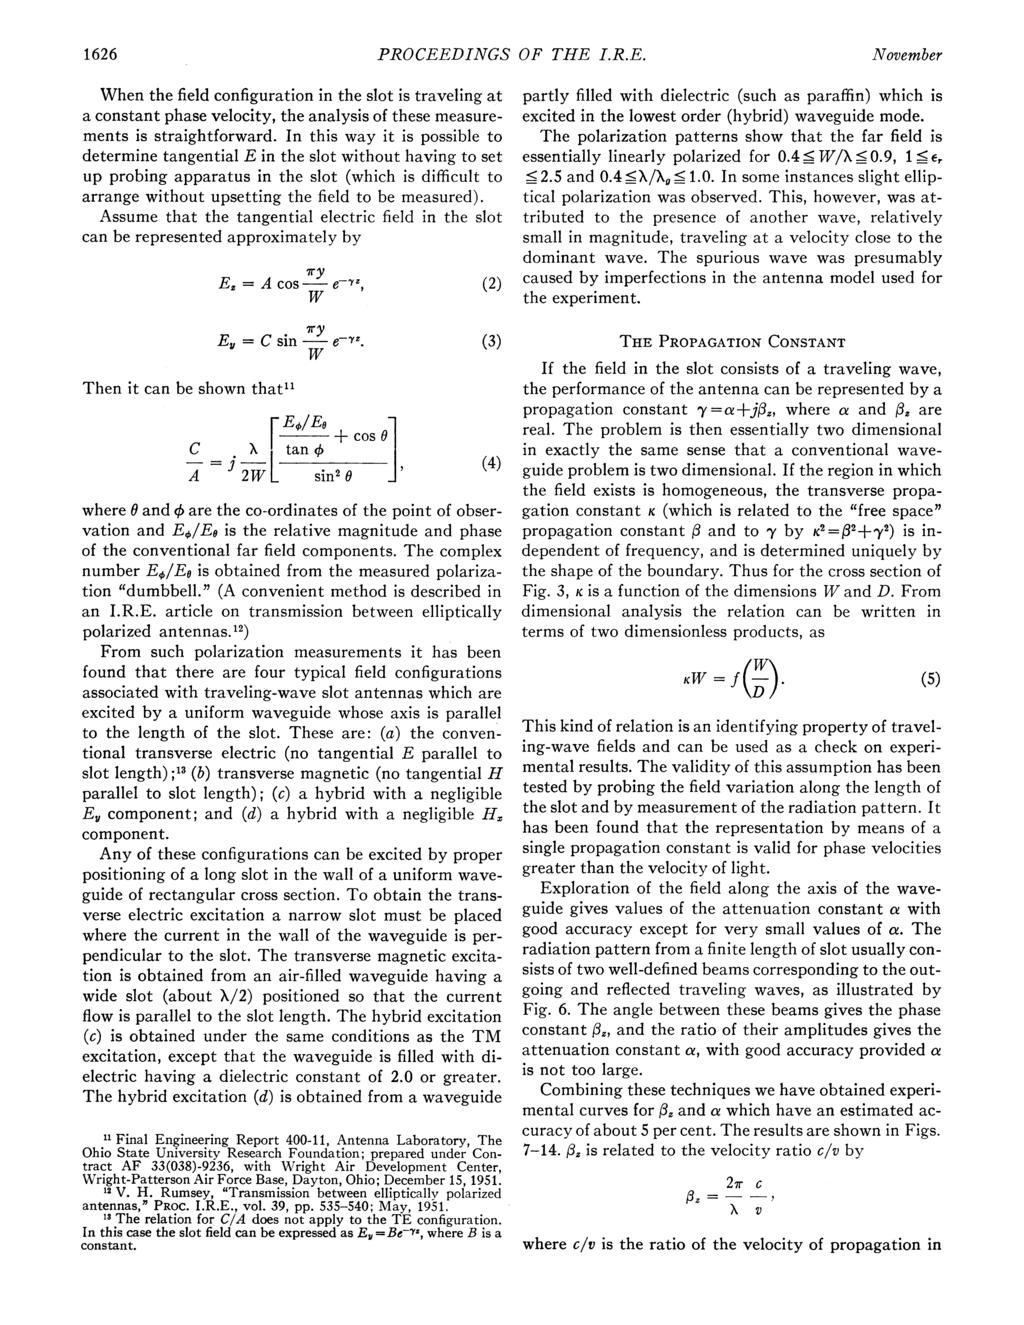 1626 PROCEEDINGS OF THE I.R.E. November When the field configuration in the slot is traveling at a constant phase velocity, the analysis of these measurements is straightforward.